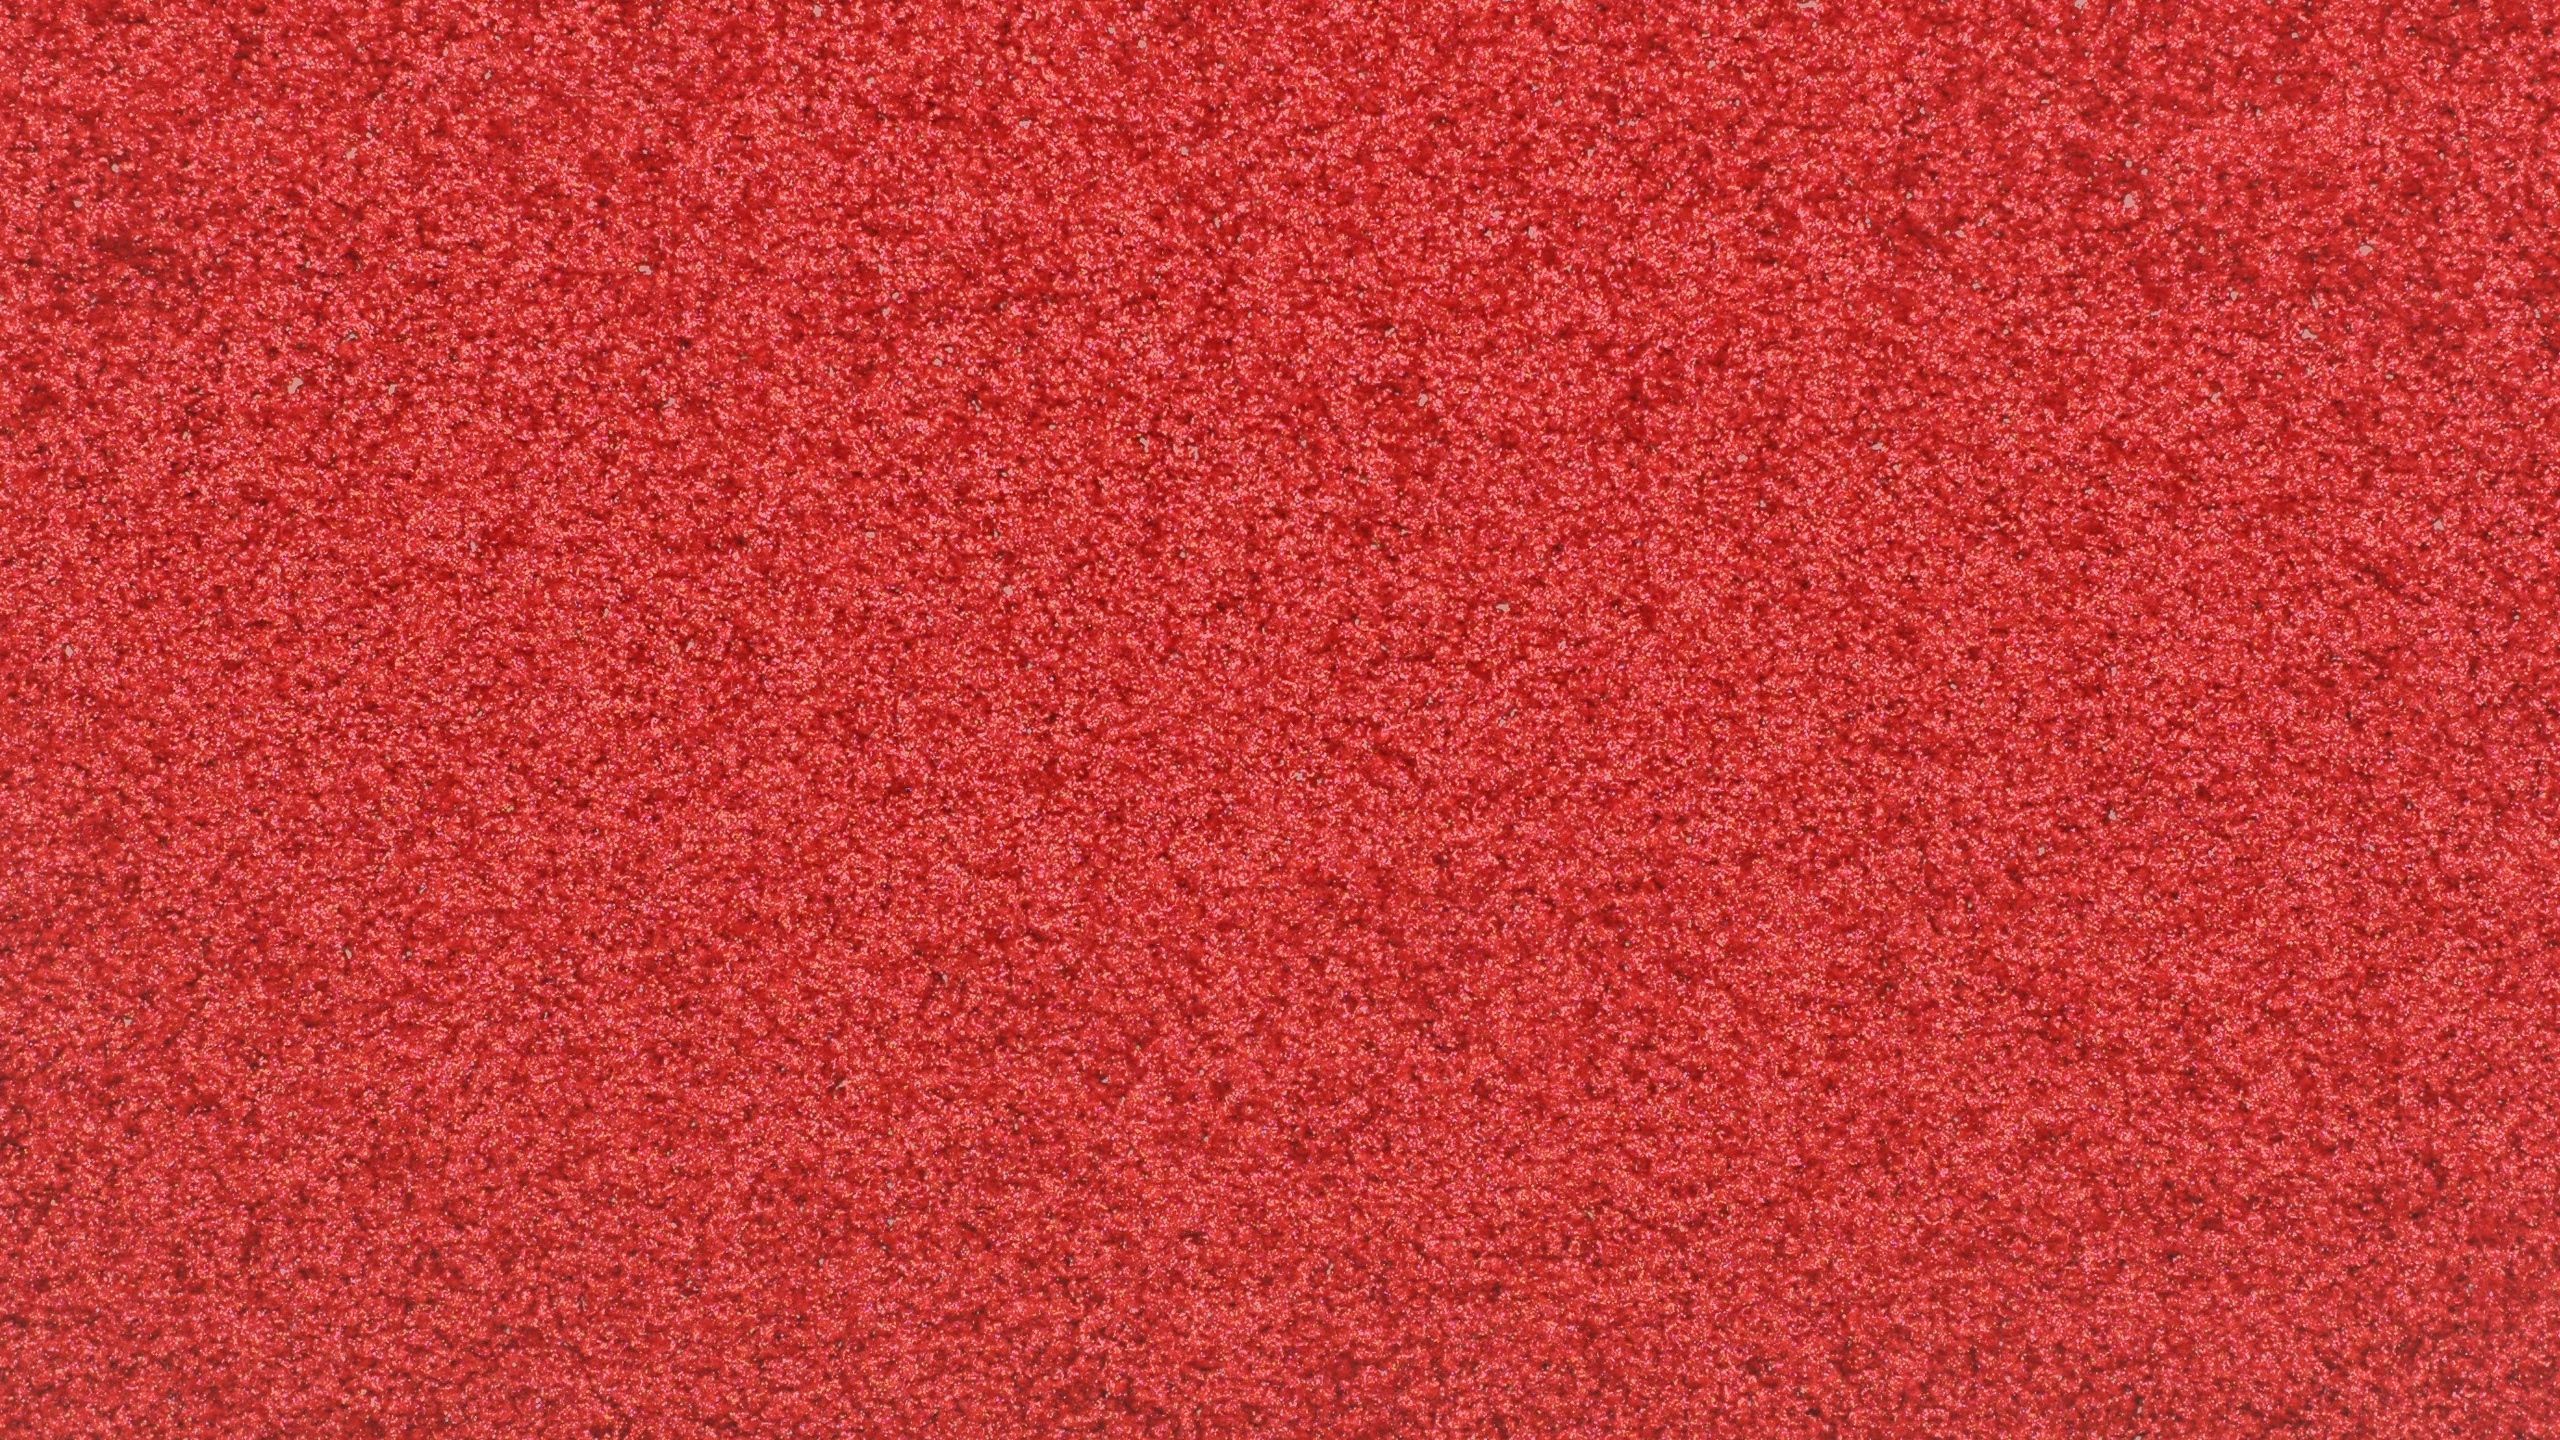 Download Wallpaper 2560x1440 Texture, Red, Carpet, Rug, Background ...